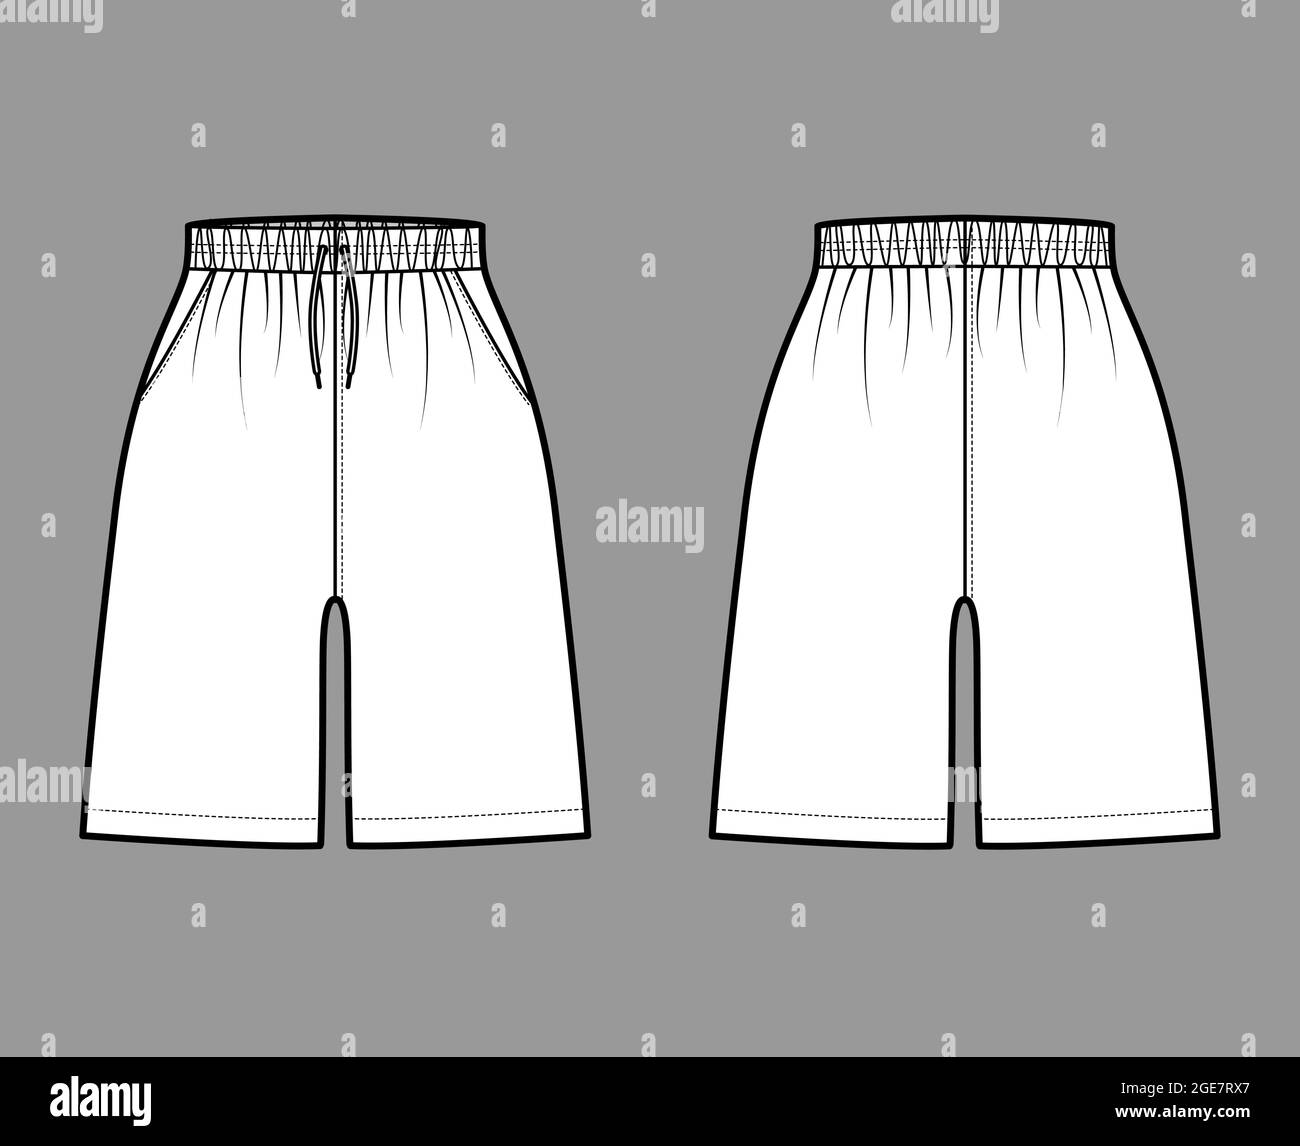 Active Shorts Sport training technical fashion illustration with ...